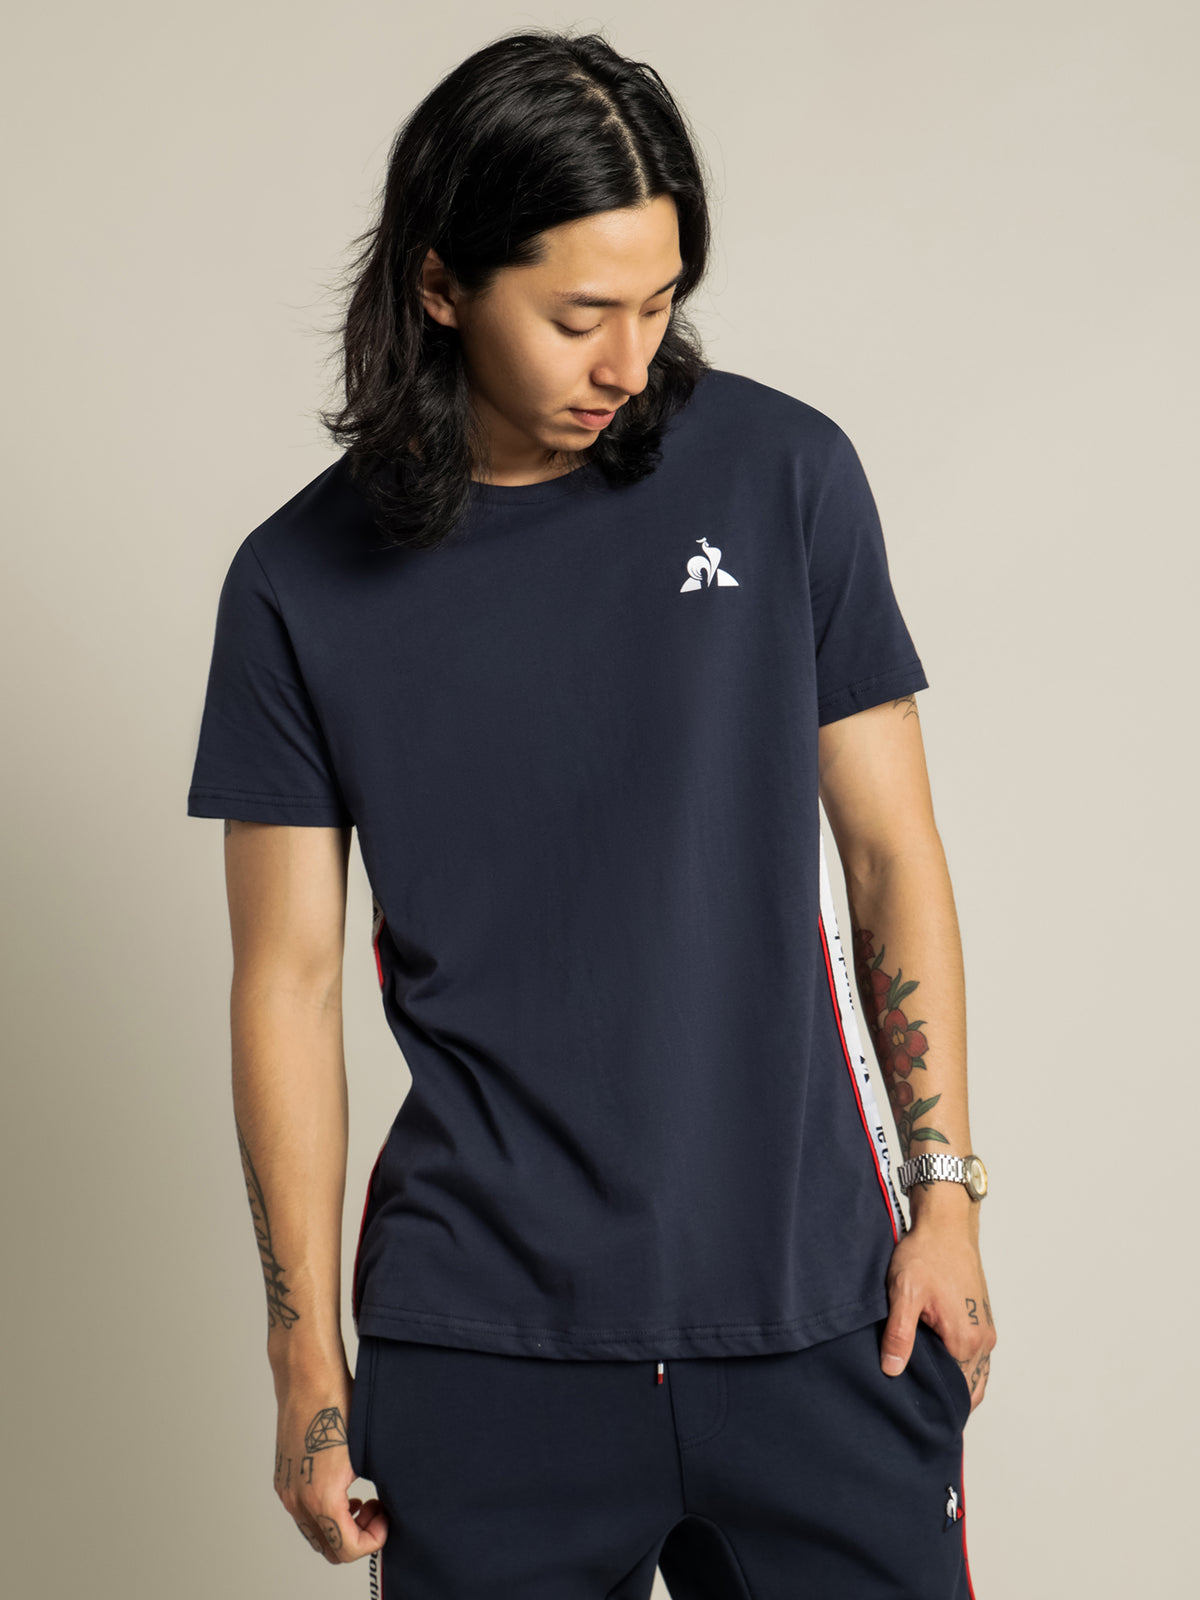 Royale T-Shirt in Dress Blue